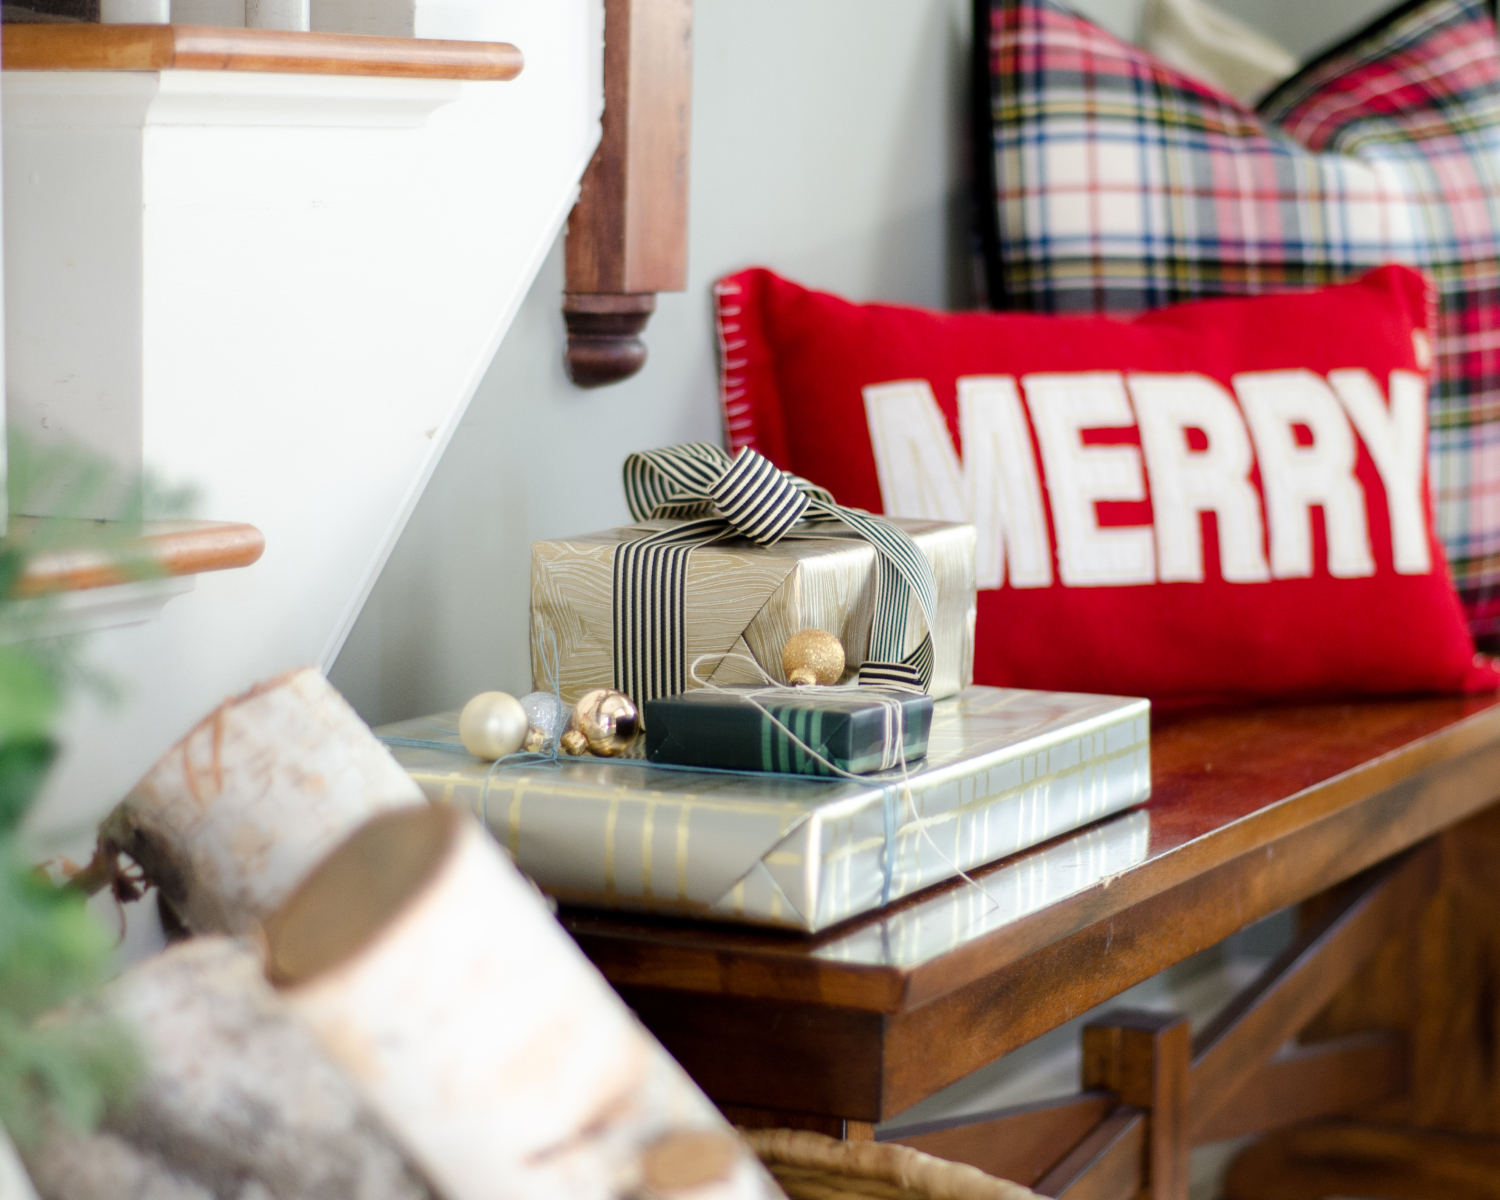 Classic Christmas entry with red, black, white, and greenery